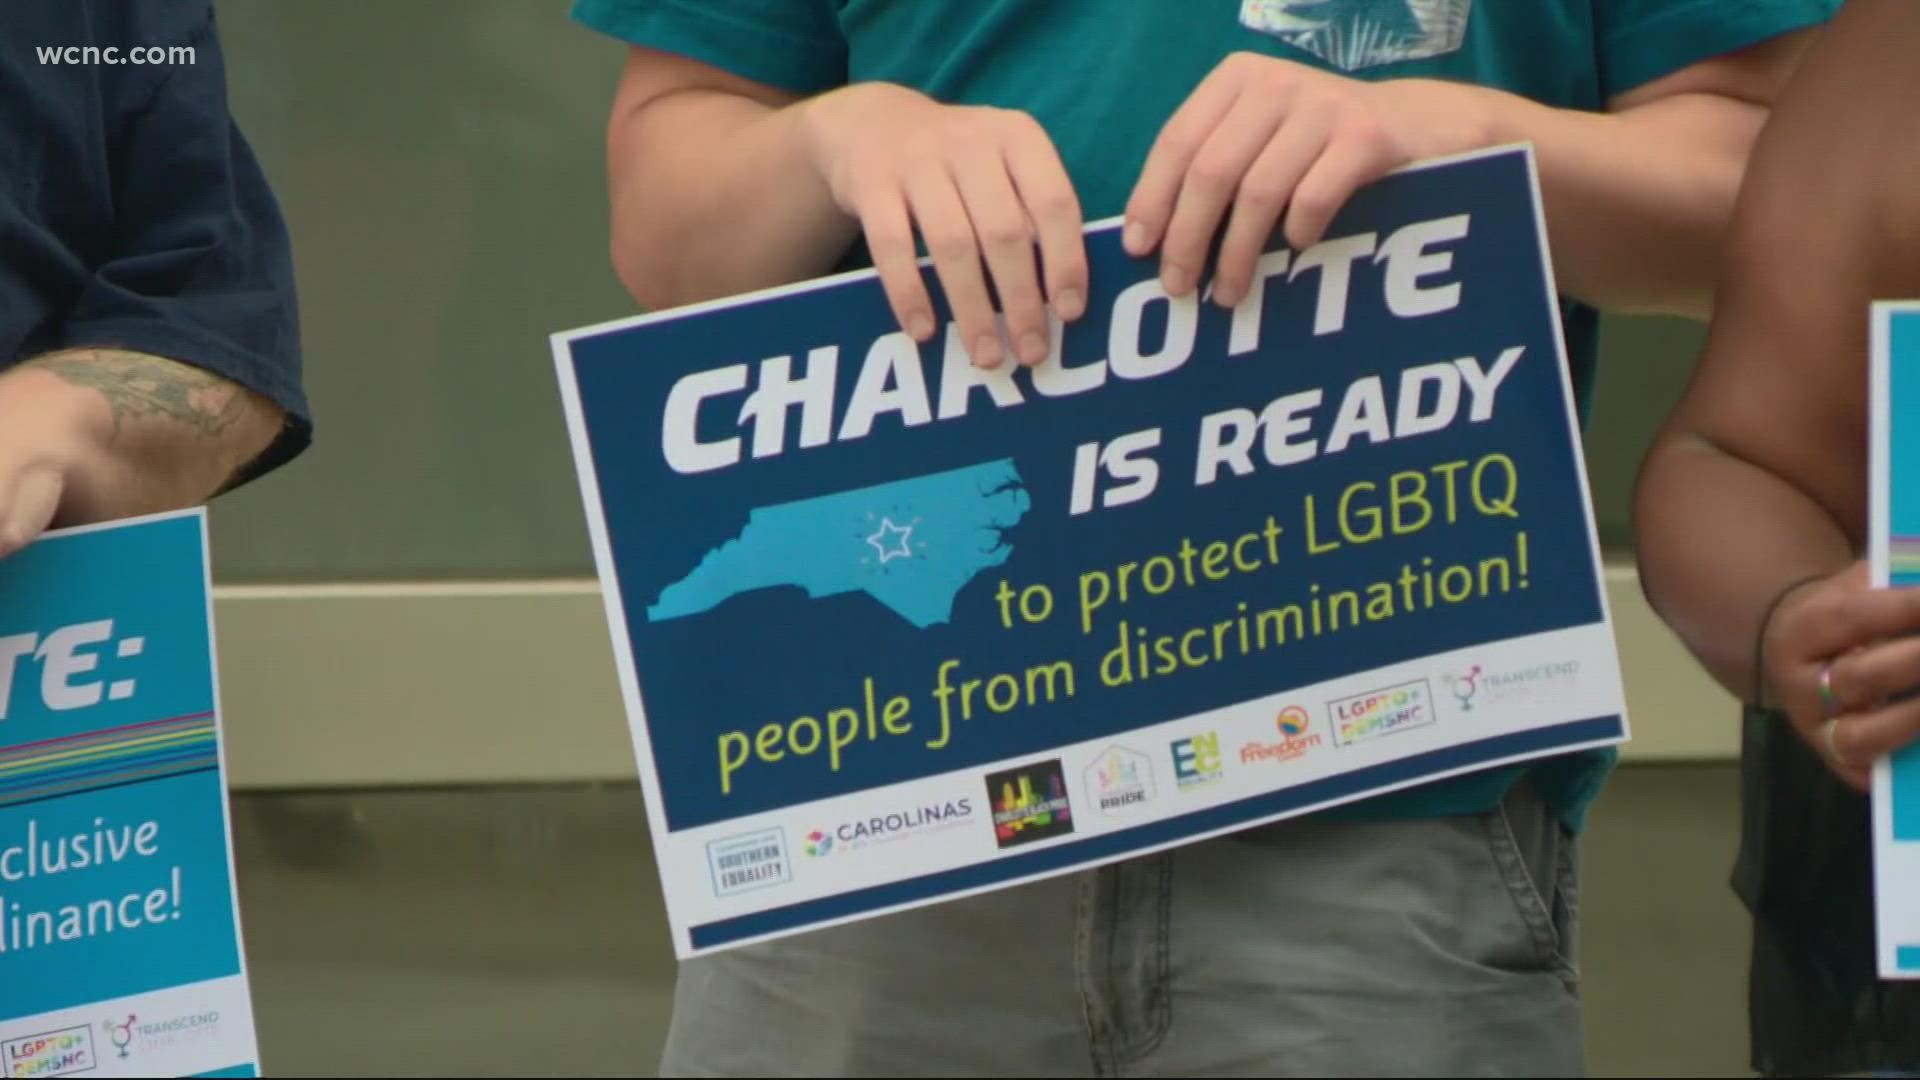 Now, Charlotte's LGBTQ community may have some new allies in their battle for equality in the eyes of the government: Republicans.